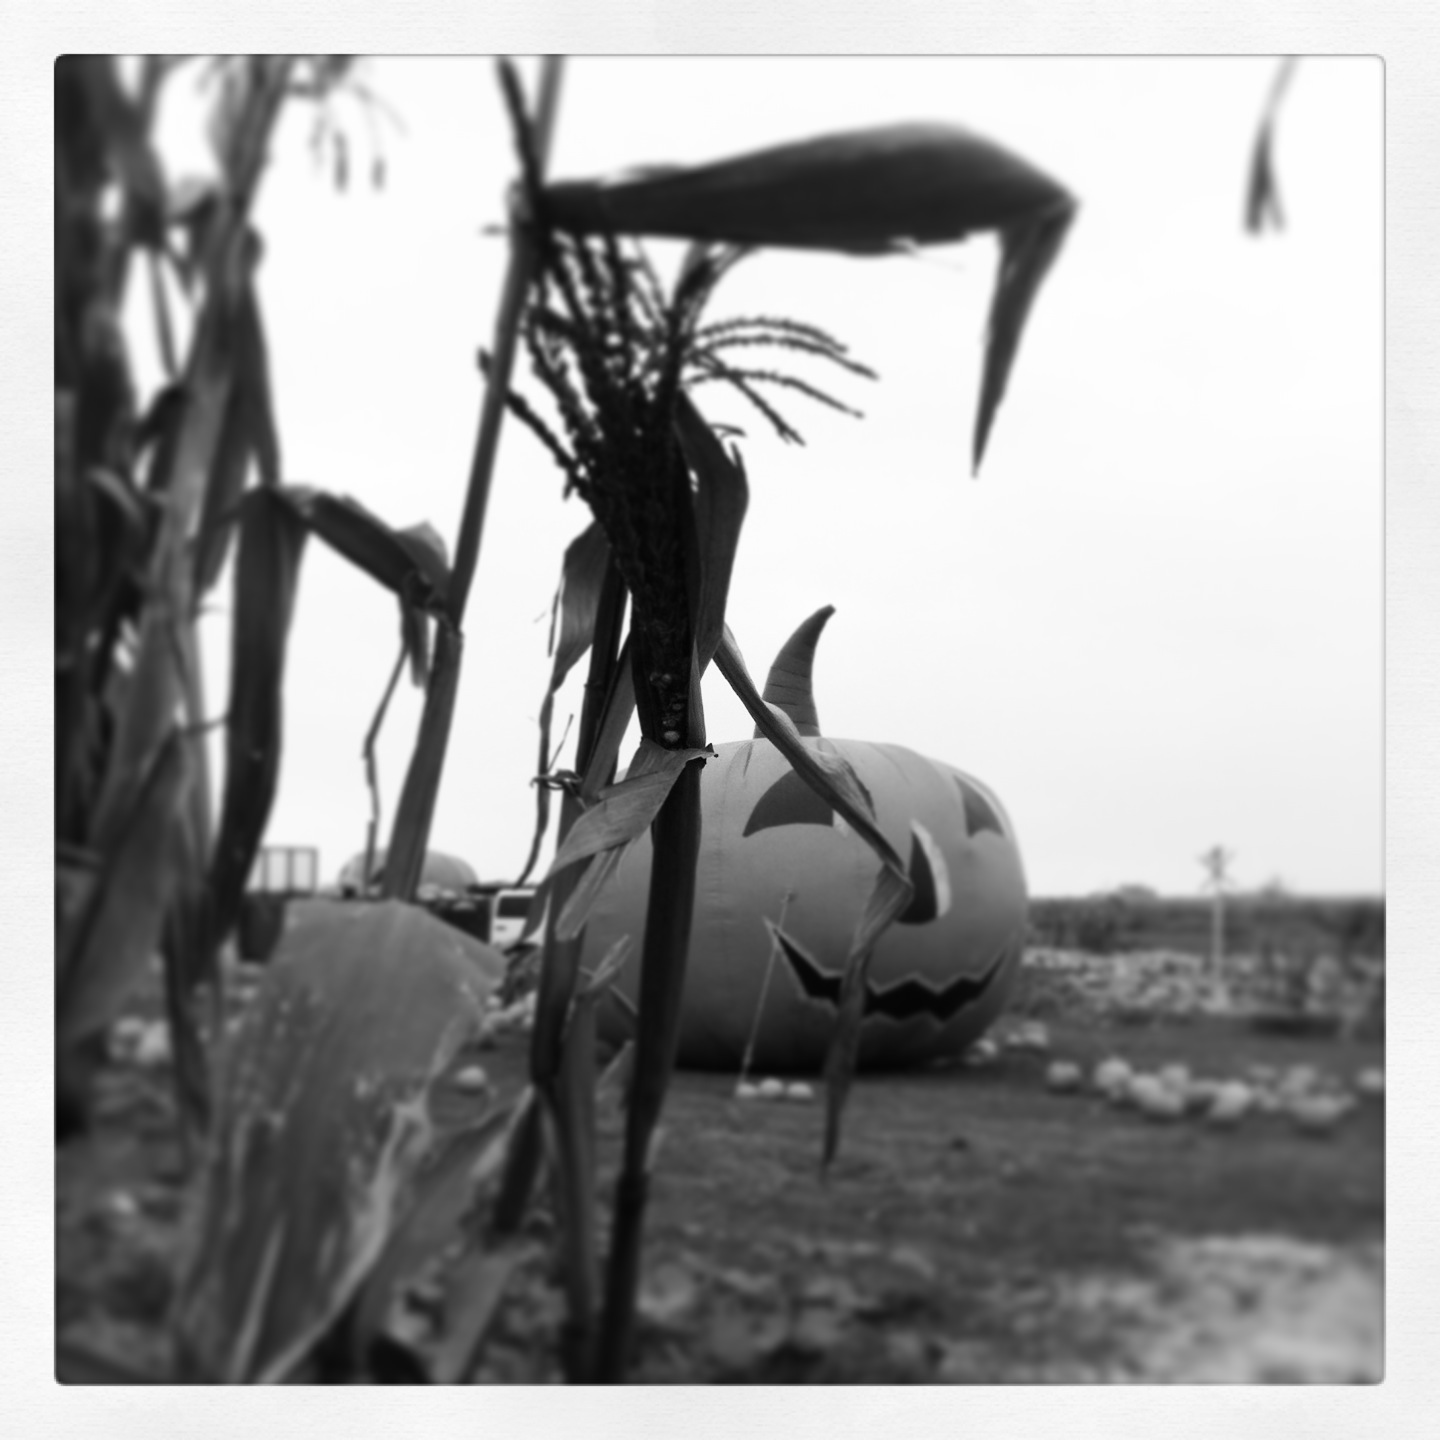 Halloween decorations events Giant Pumpkin cornfield black and white photo Los Angeles Those Someday Goals